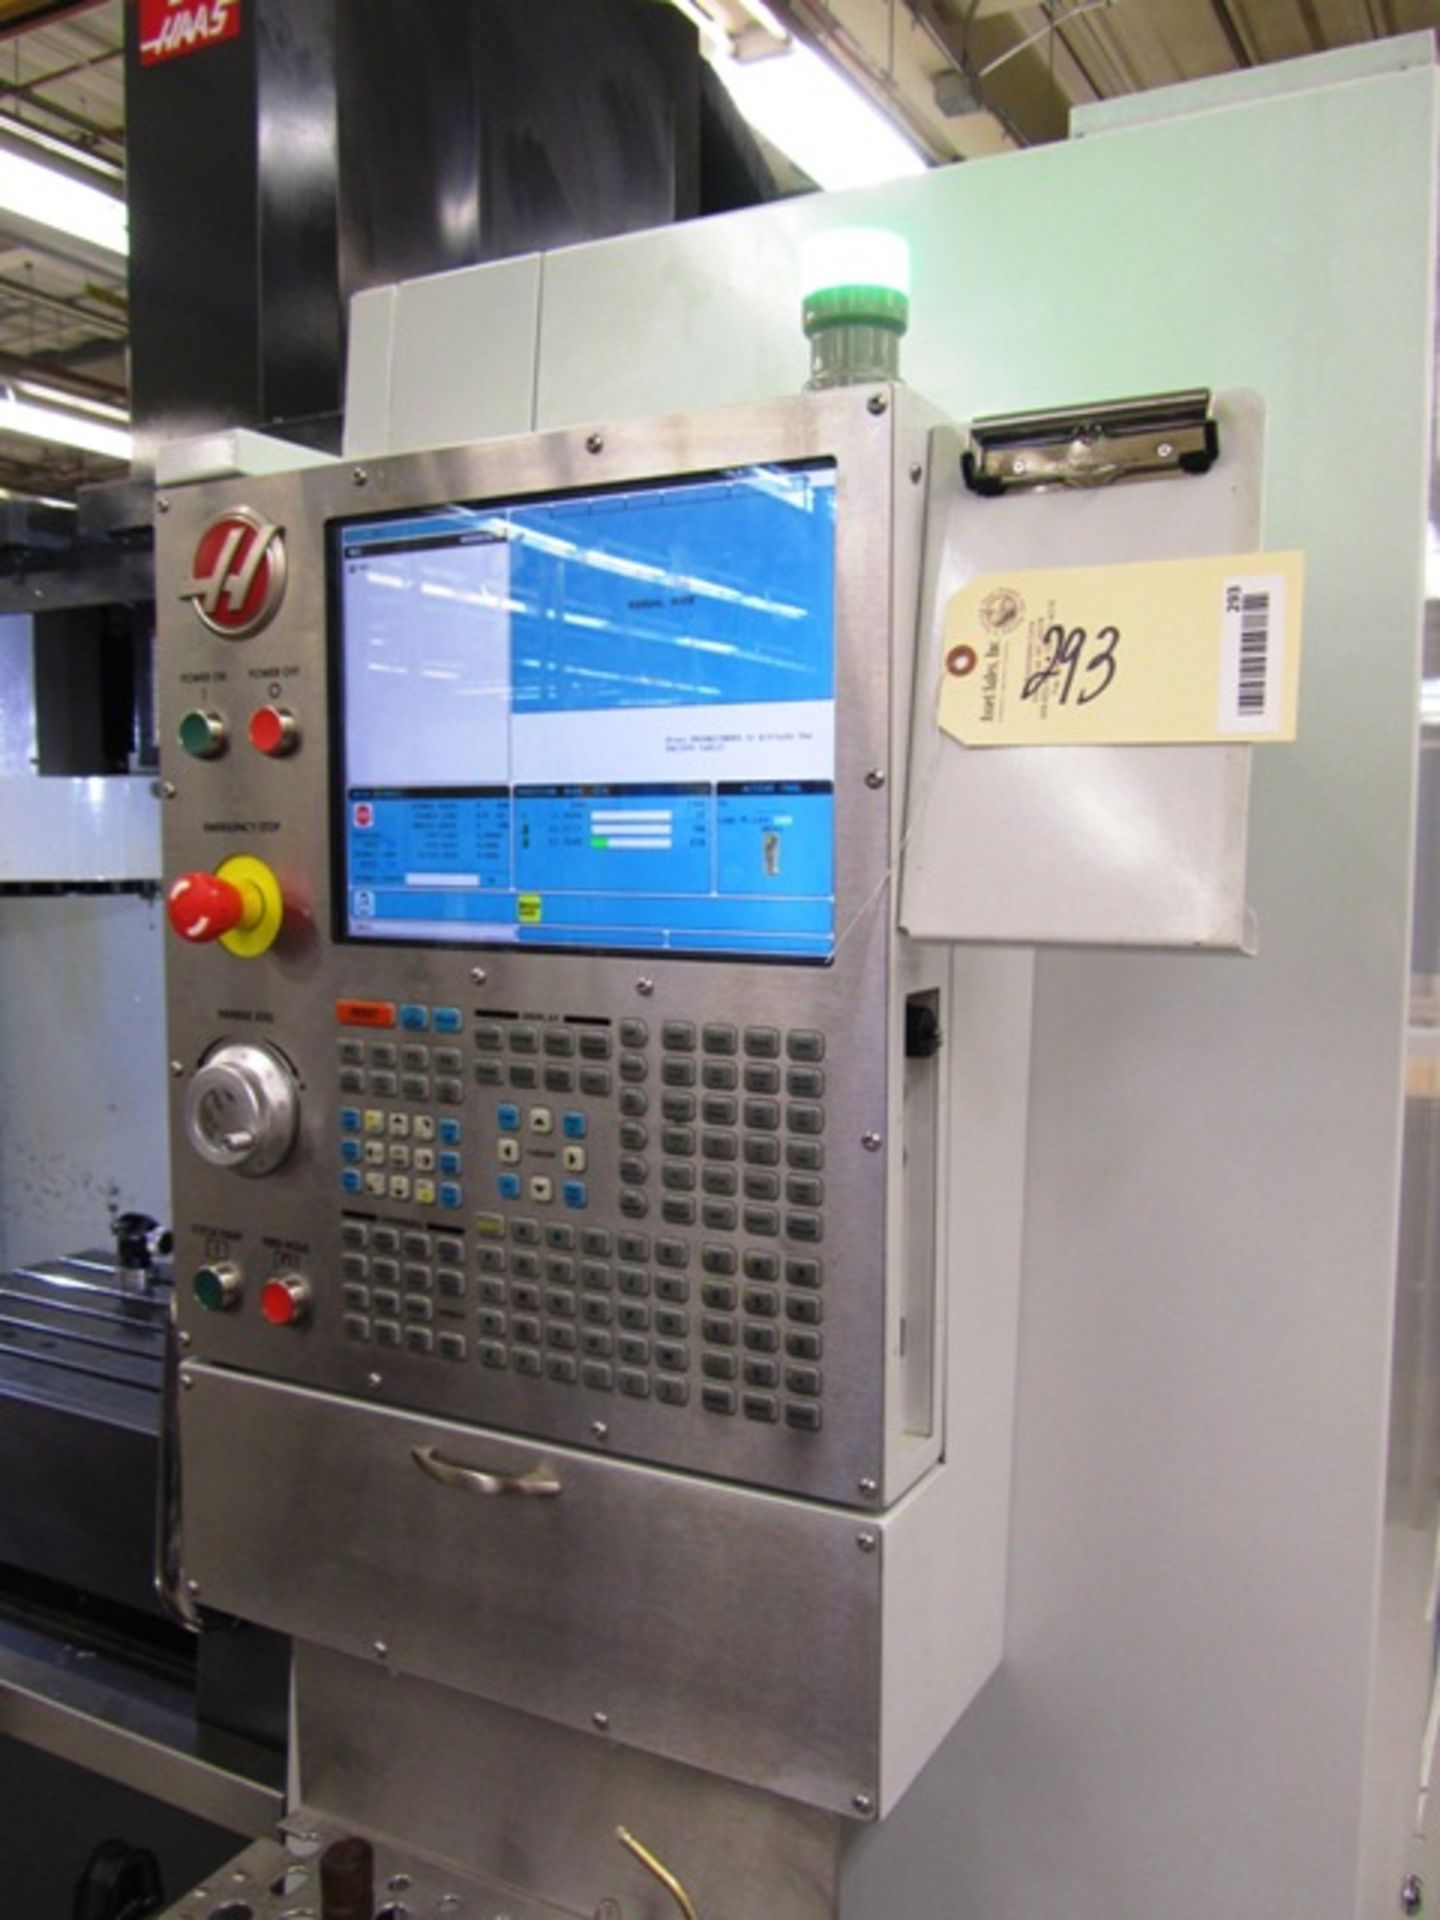 Haas VF-3 CNC Vertical Machining Center - Image 2 of 5